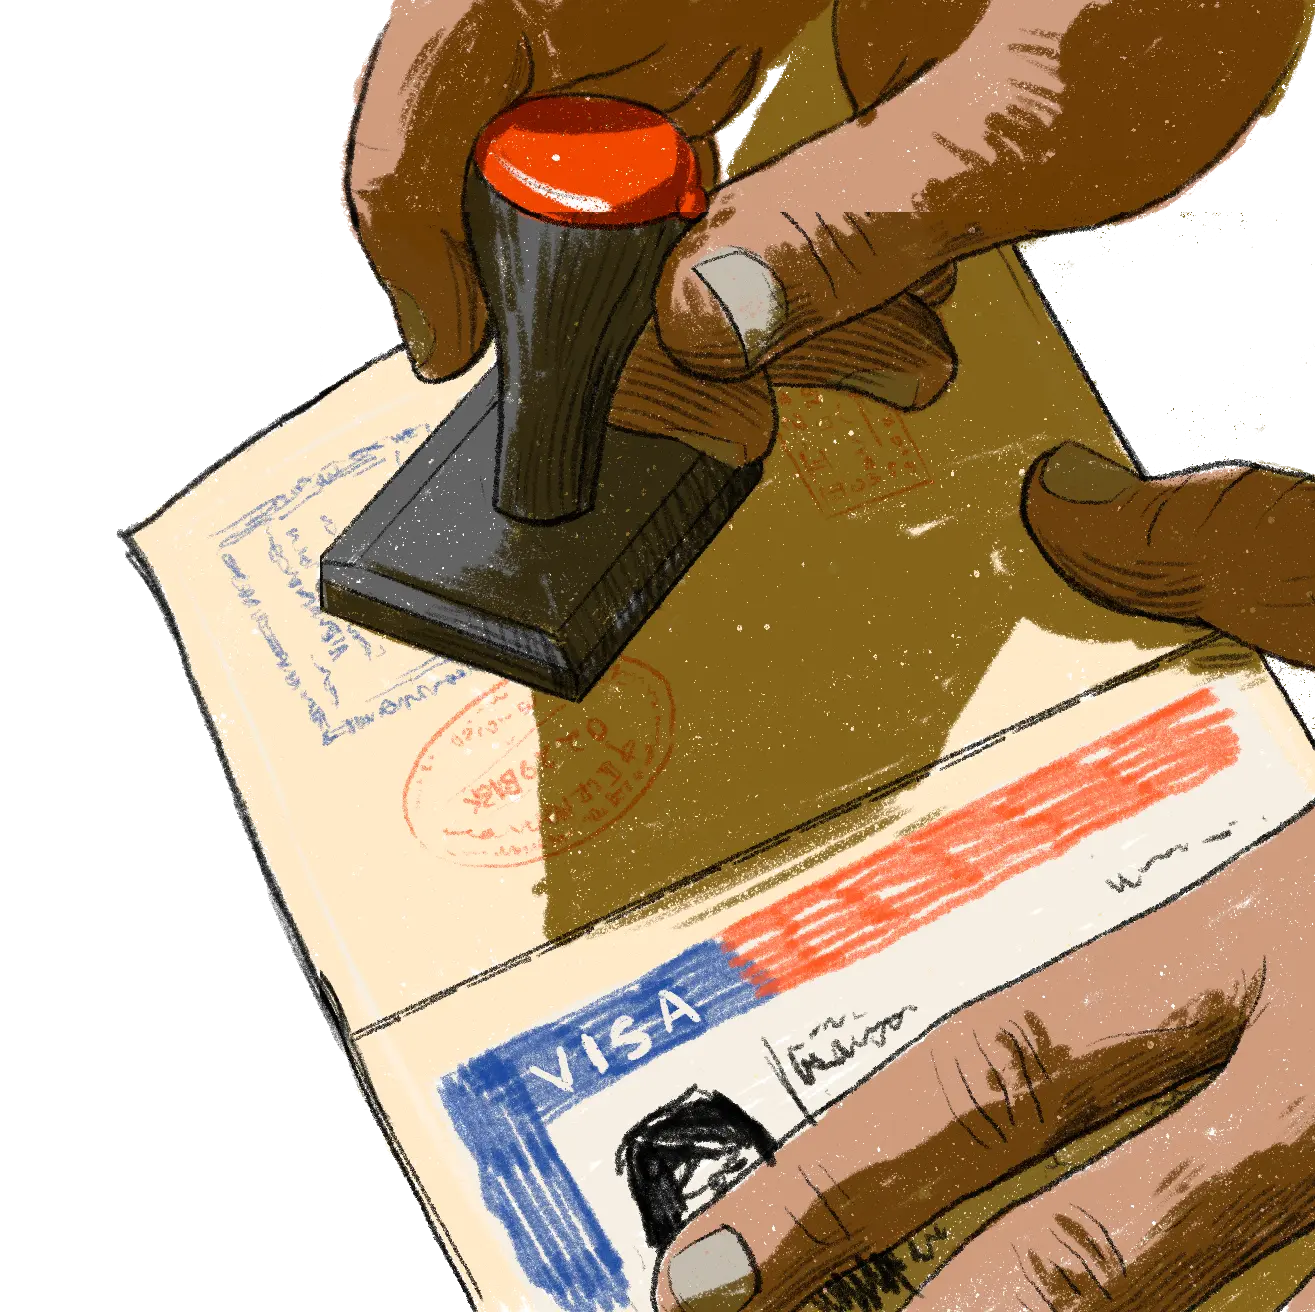 Illustration of hands stamping a passport, with a visa document shown on the other passport page